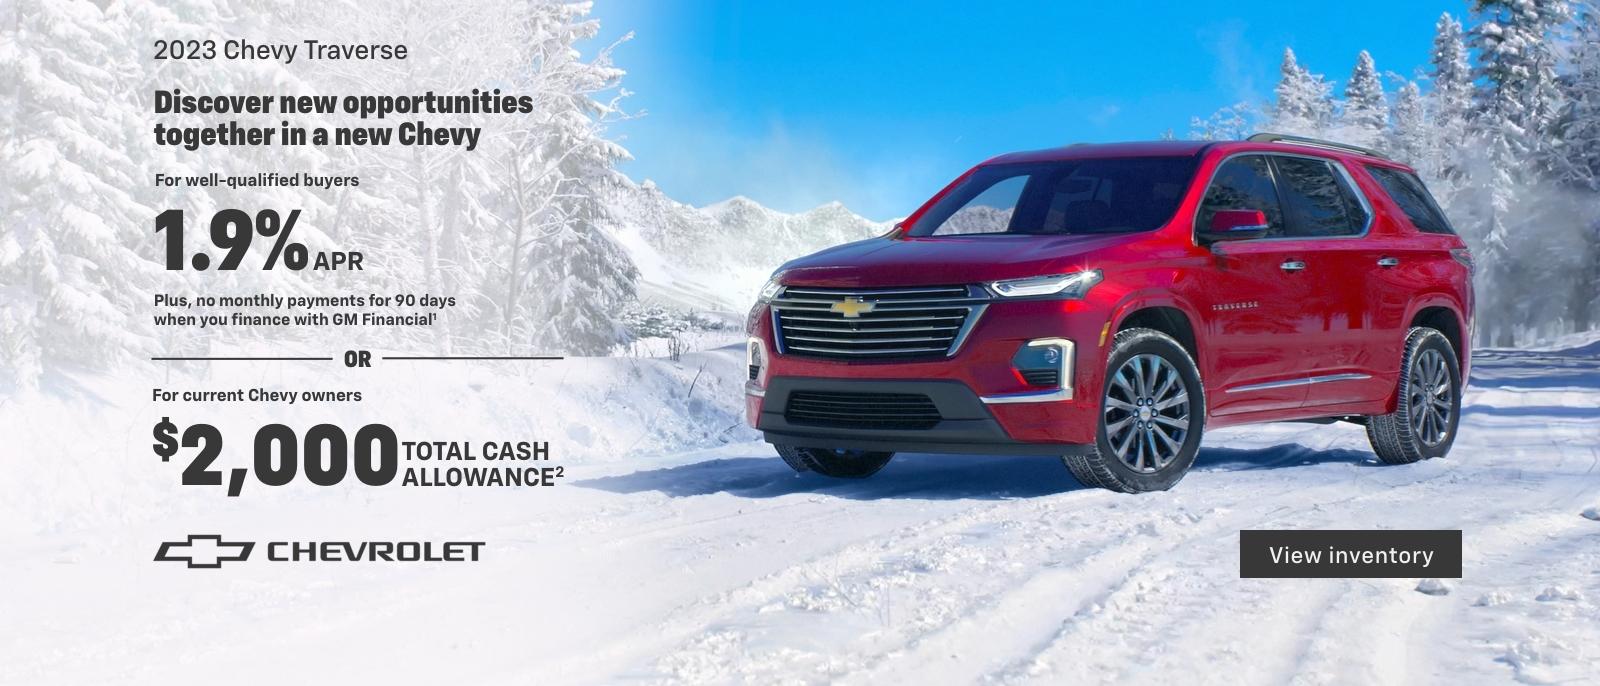 2023 Chevy Traverse. For well-qualified buyers 2.1% APR + no monthly payments for 90 days when you finance with GM Financial. Or, for current Chevy owners $2,000 total cash allowance.